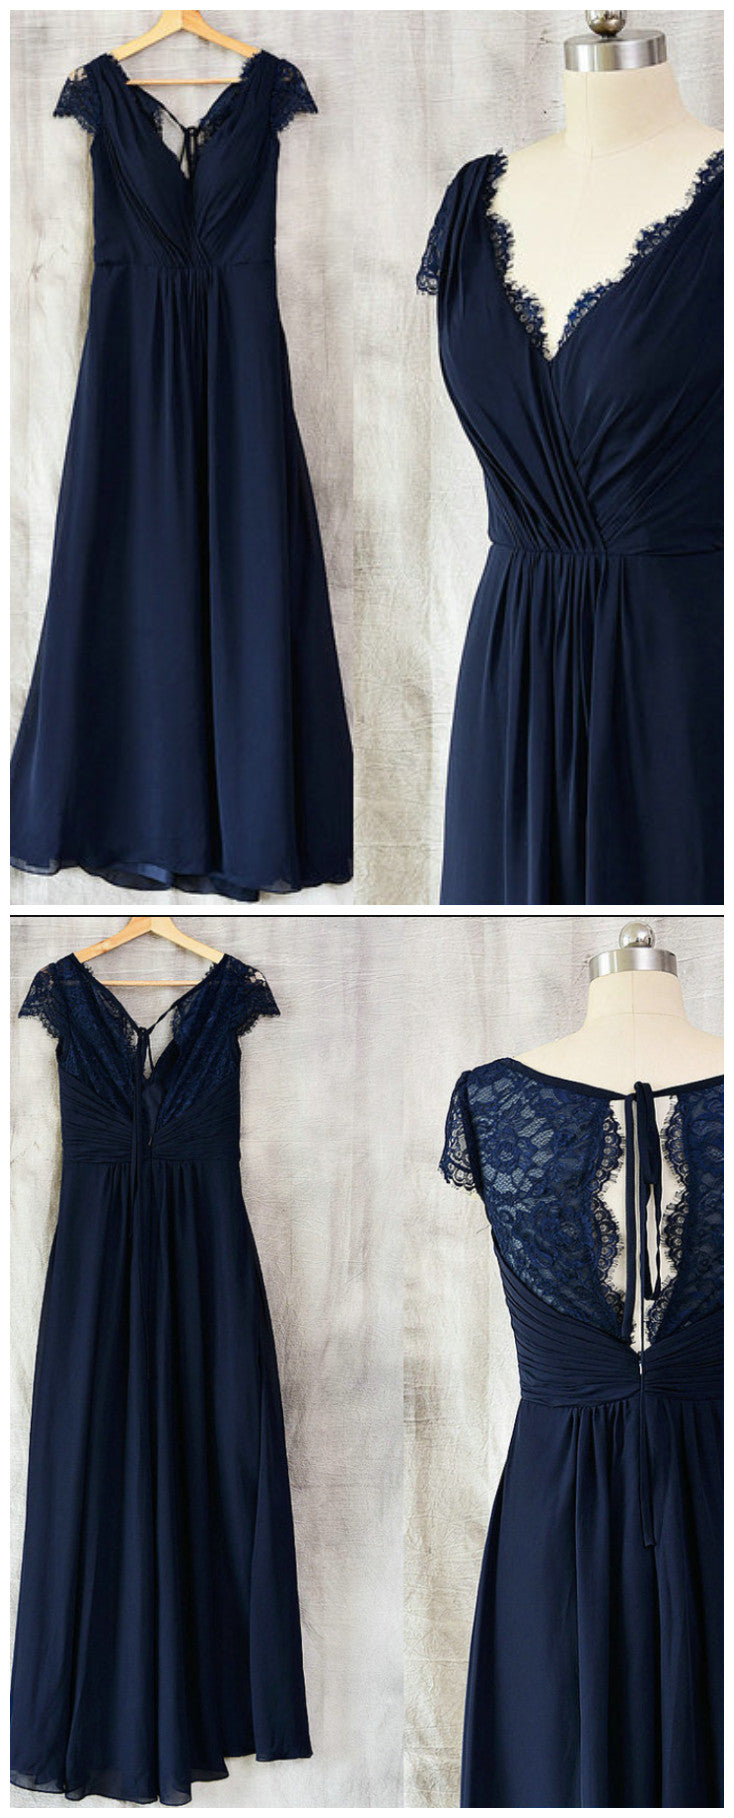 Wedding Dresses Style, Navy Blue Chiffon with Lace A-line Long Bridesmaid Dress, Wedding Party Dress